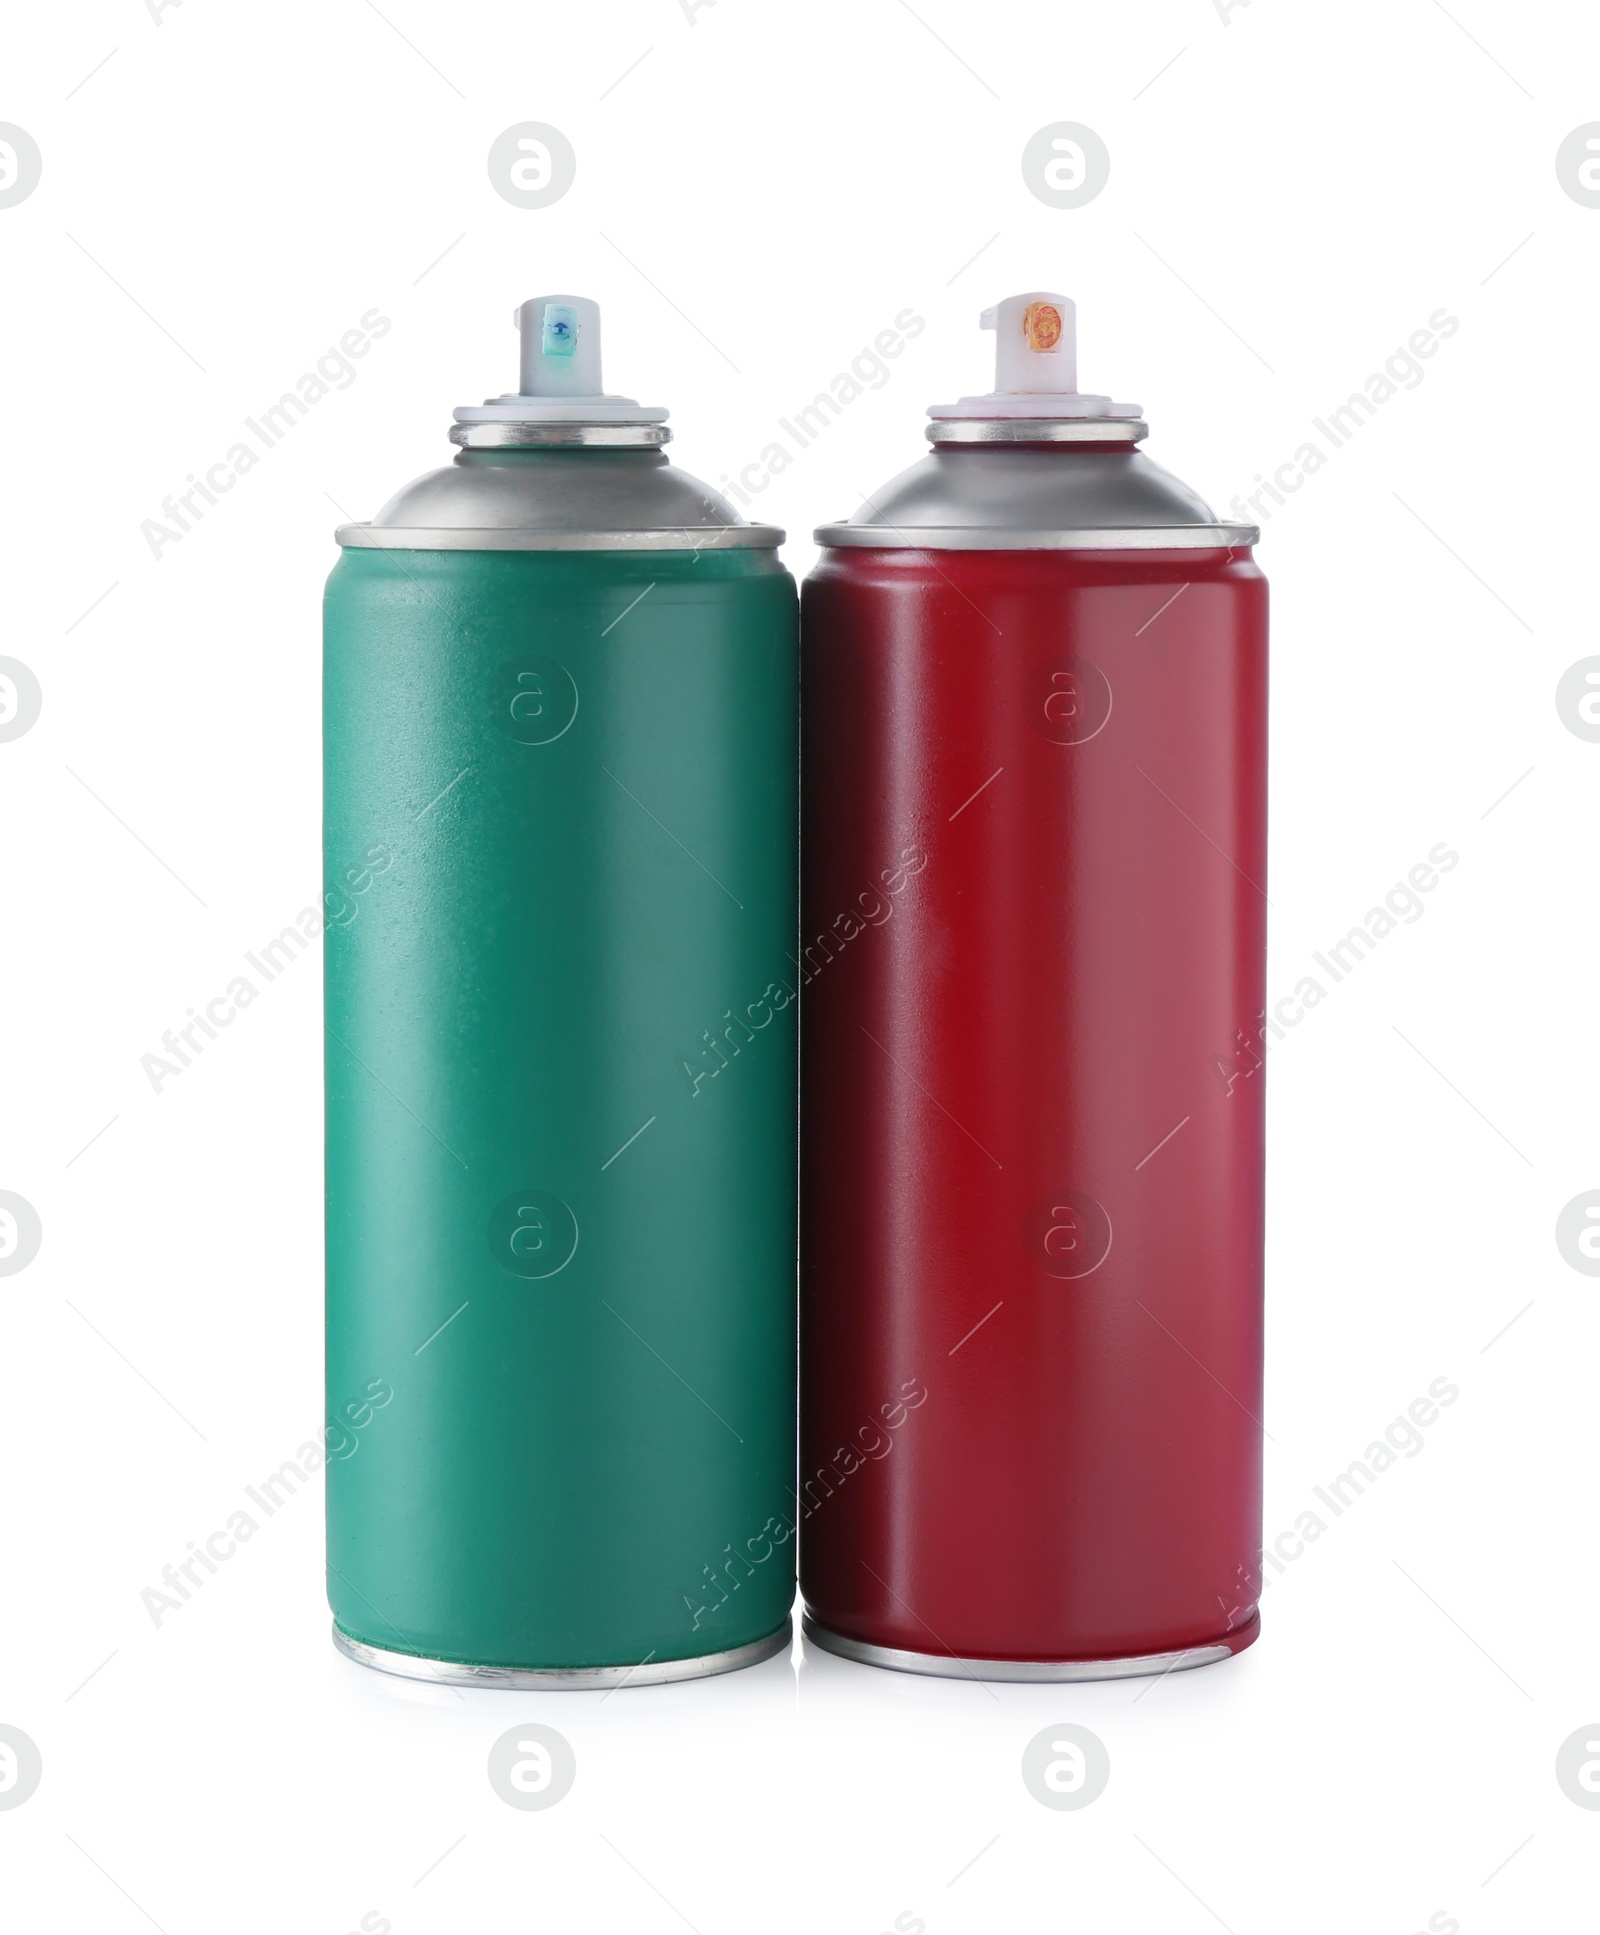 Photo of Two spray paint cans isolated on white